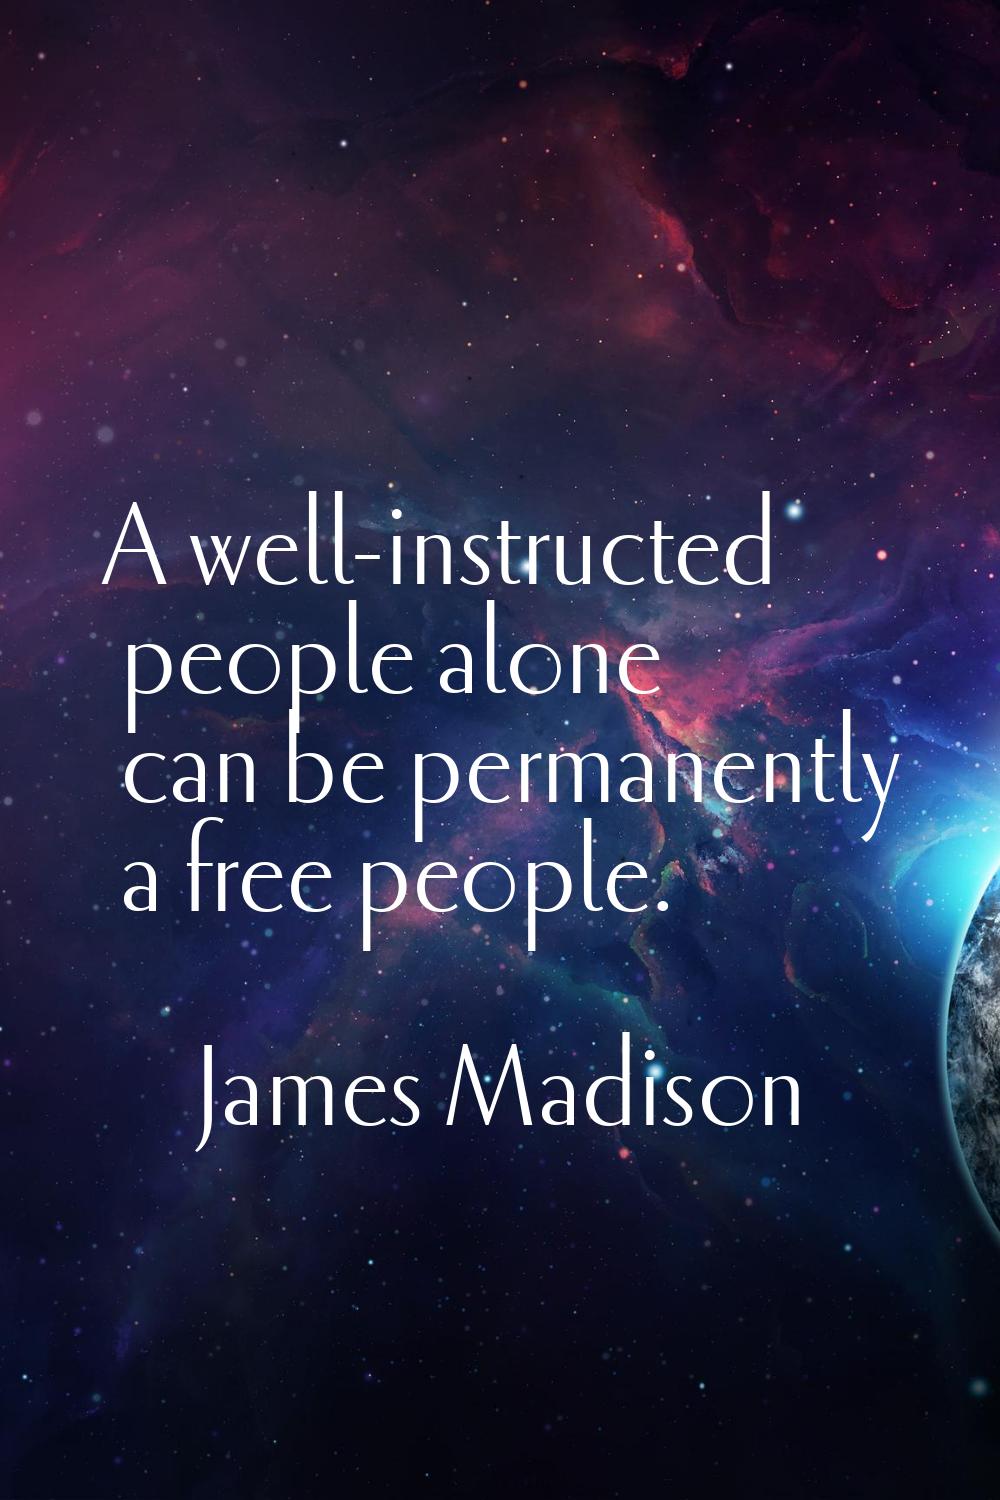 A well-instructed people alone can be permanently a free people.